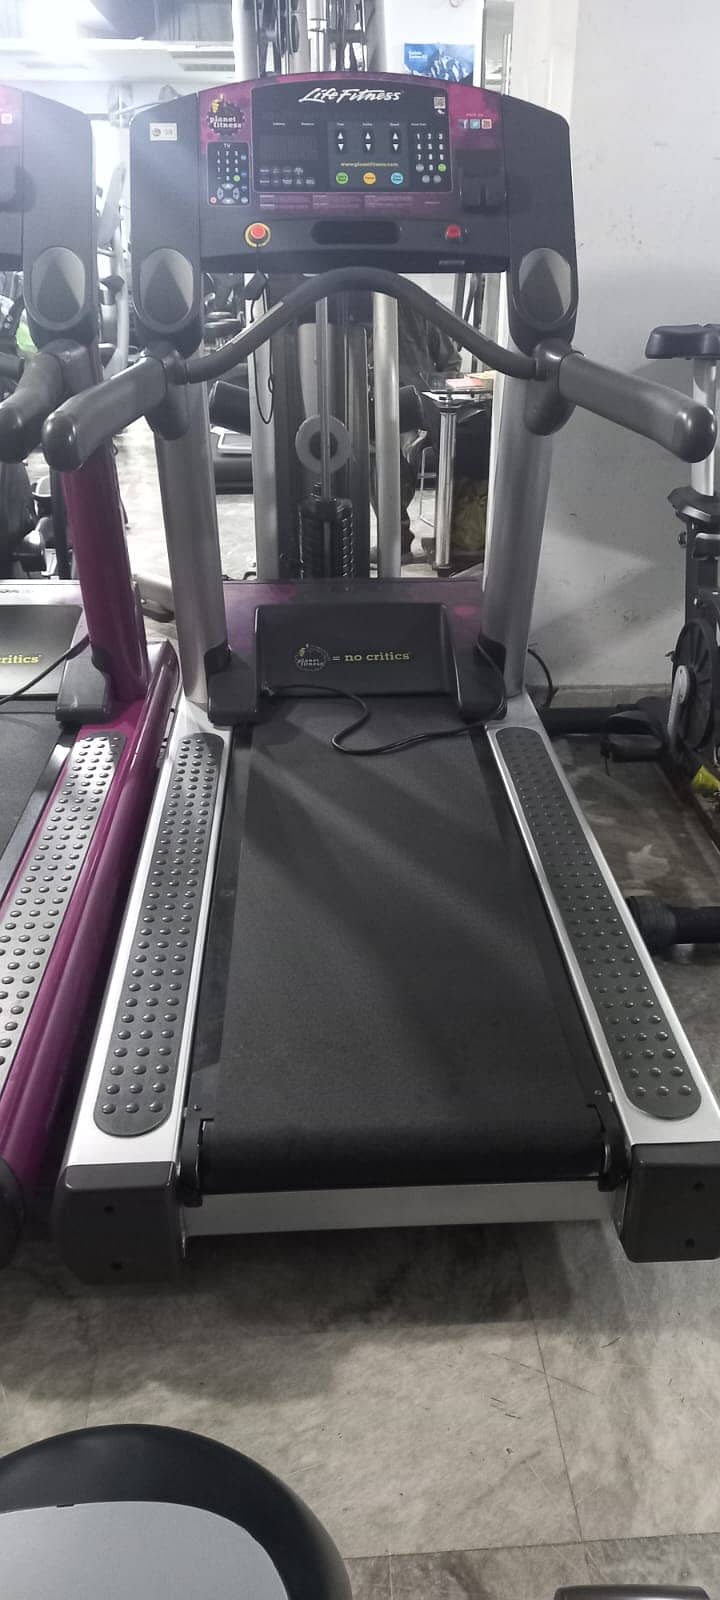 Treadmill Life fitness USA American Brand Refurbished Available 6